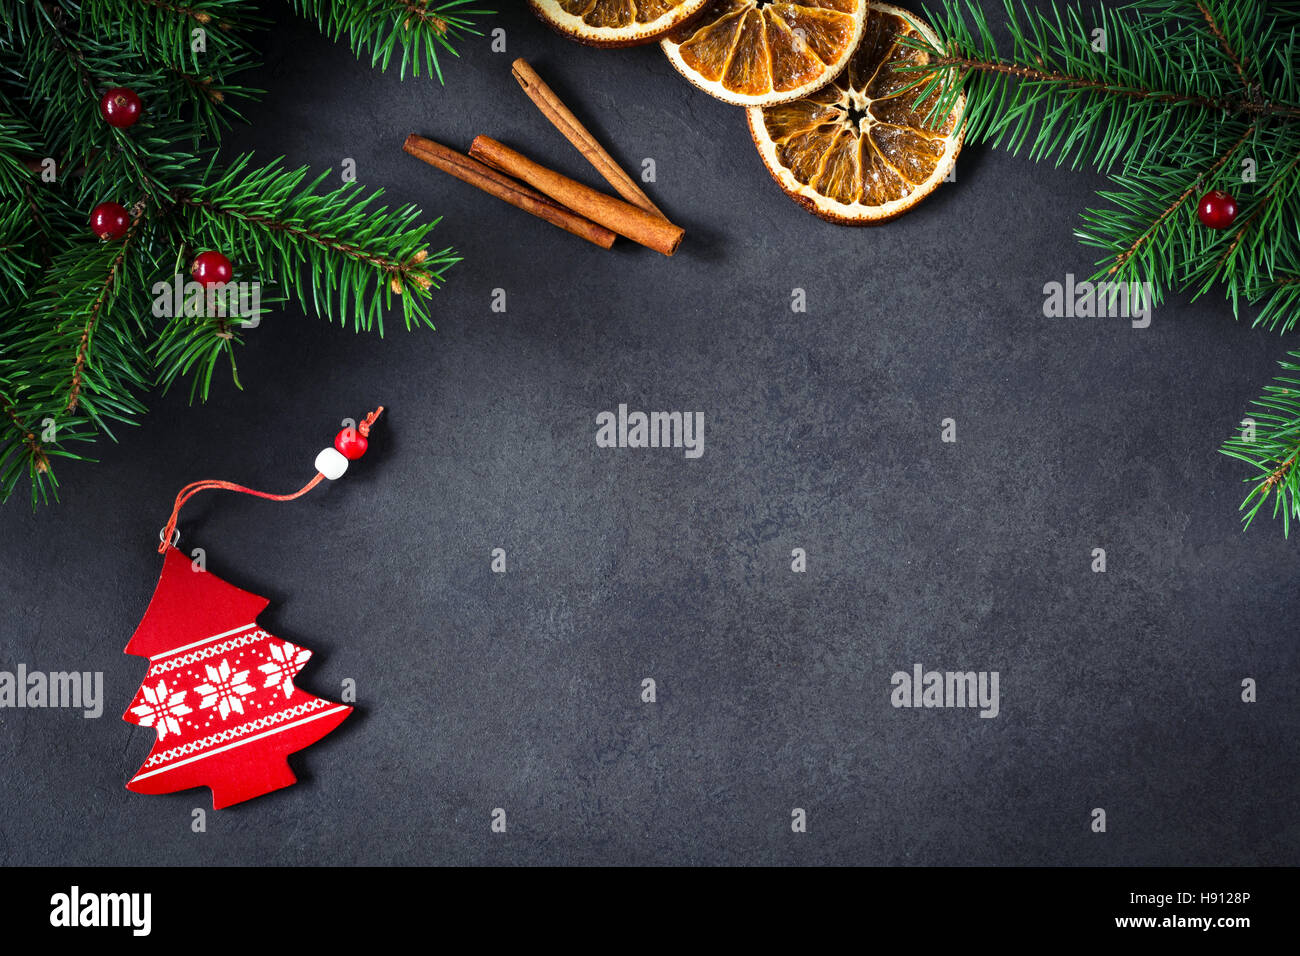 Background for Christmas or New Year: fir tree, cranberries, cinnamon and dry oranges over dark background. Copy space for text. Stock Photo